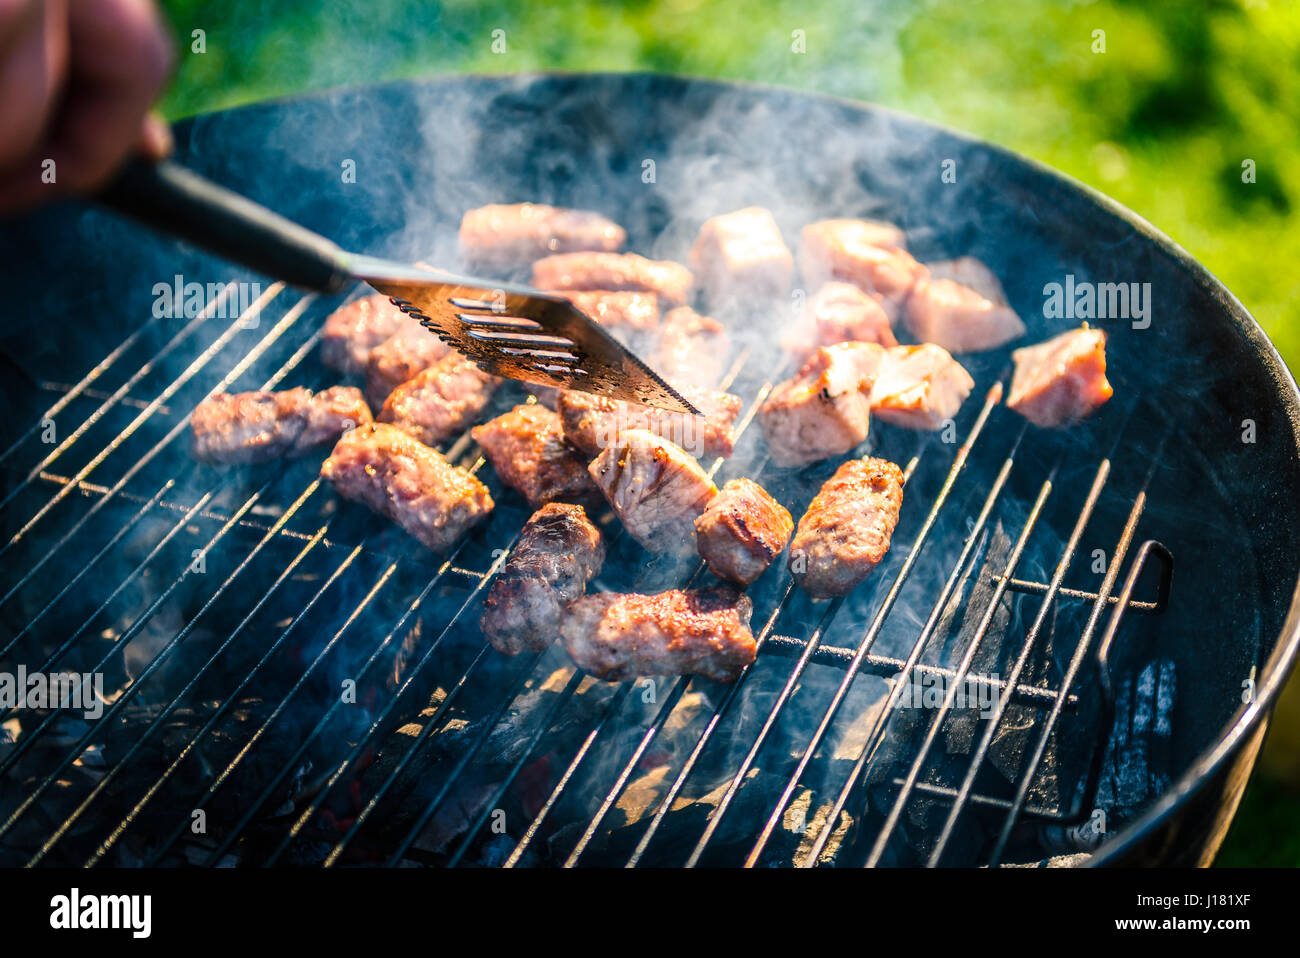 Grilling delicious variety of meat on barbecue charcoal grill. Grilling food on a weber type small cheap BBQ grill at home. Family backyard barbecue - Stock Photo